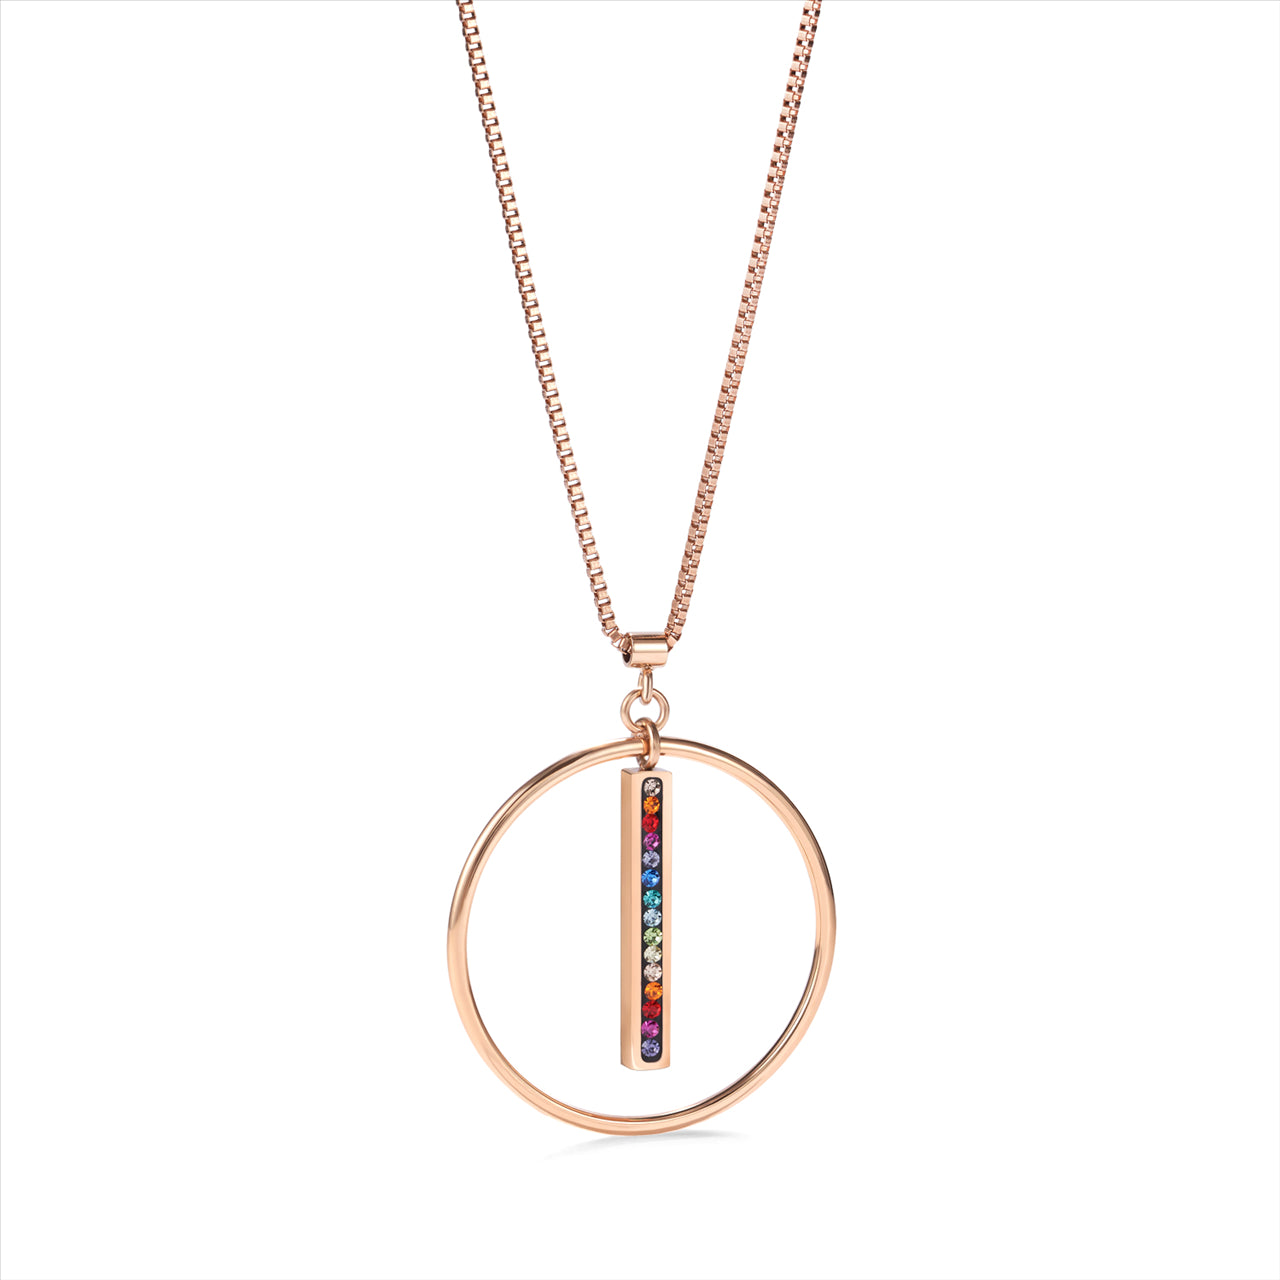 Necklace - CDL - rose gold plated stainless steel chain with multi coloured Swarovski crystal drop surrounded in a circle design pendant